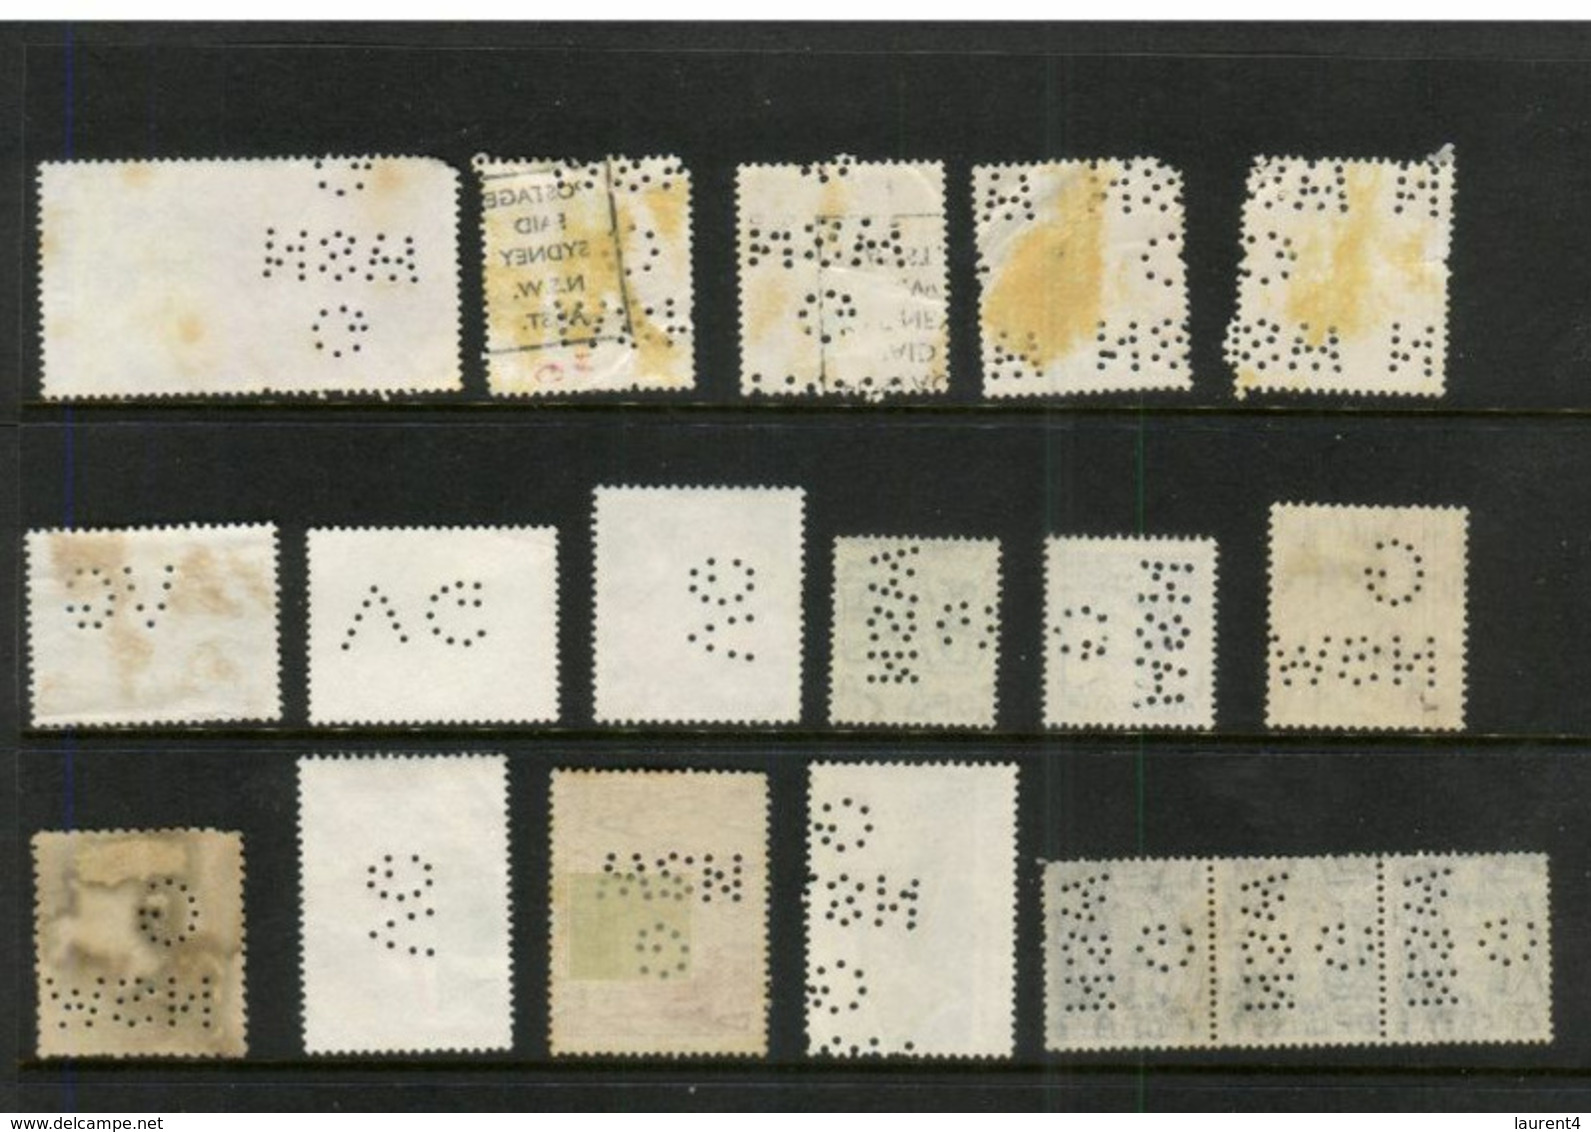 (stamp 7-9-2020) Australian Selection Of PERFINS / PERFORER /  Stamp  (as Seen On Scan) 18 Stamps - Perforés